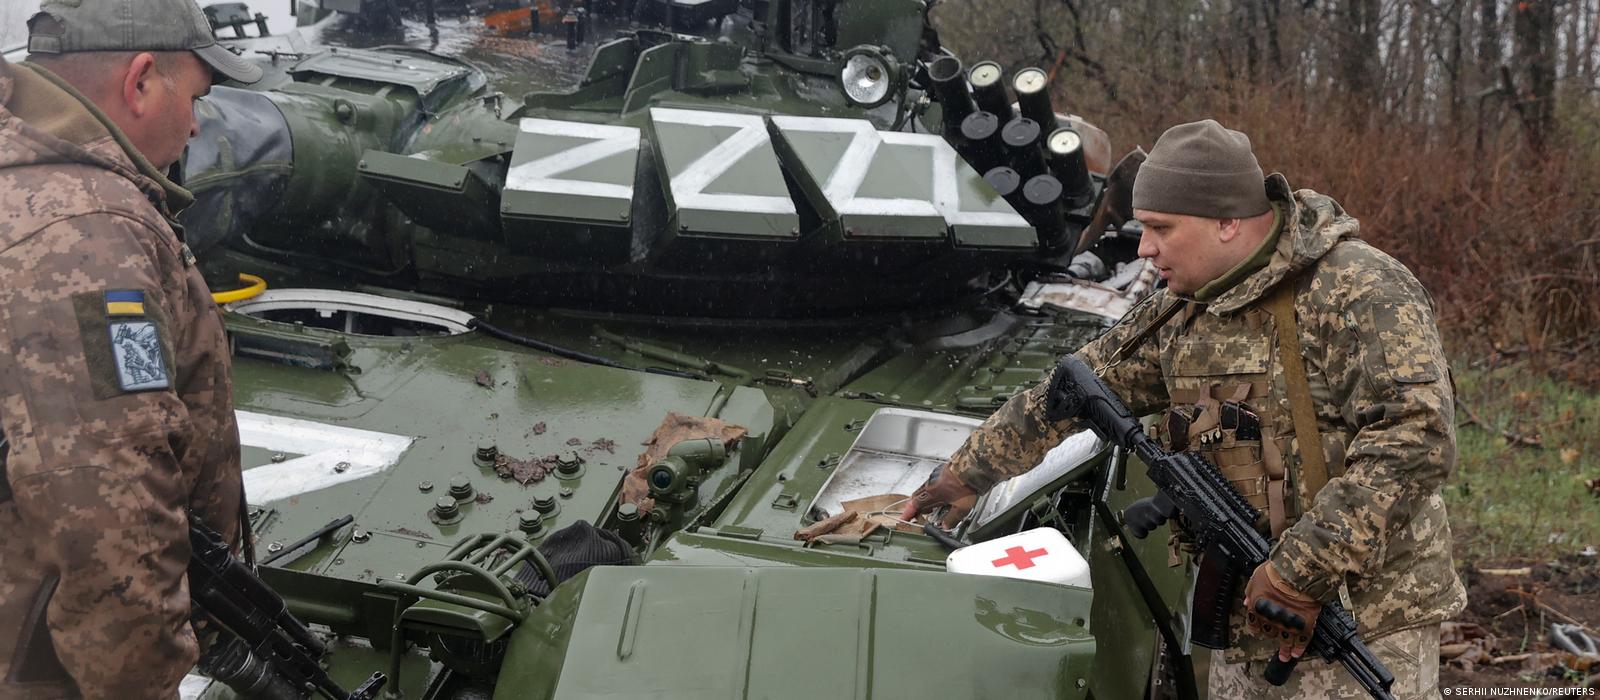 Ukraine Armed With Modern T-90 Tanks Captured From the Russians